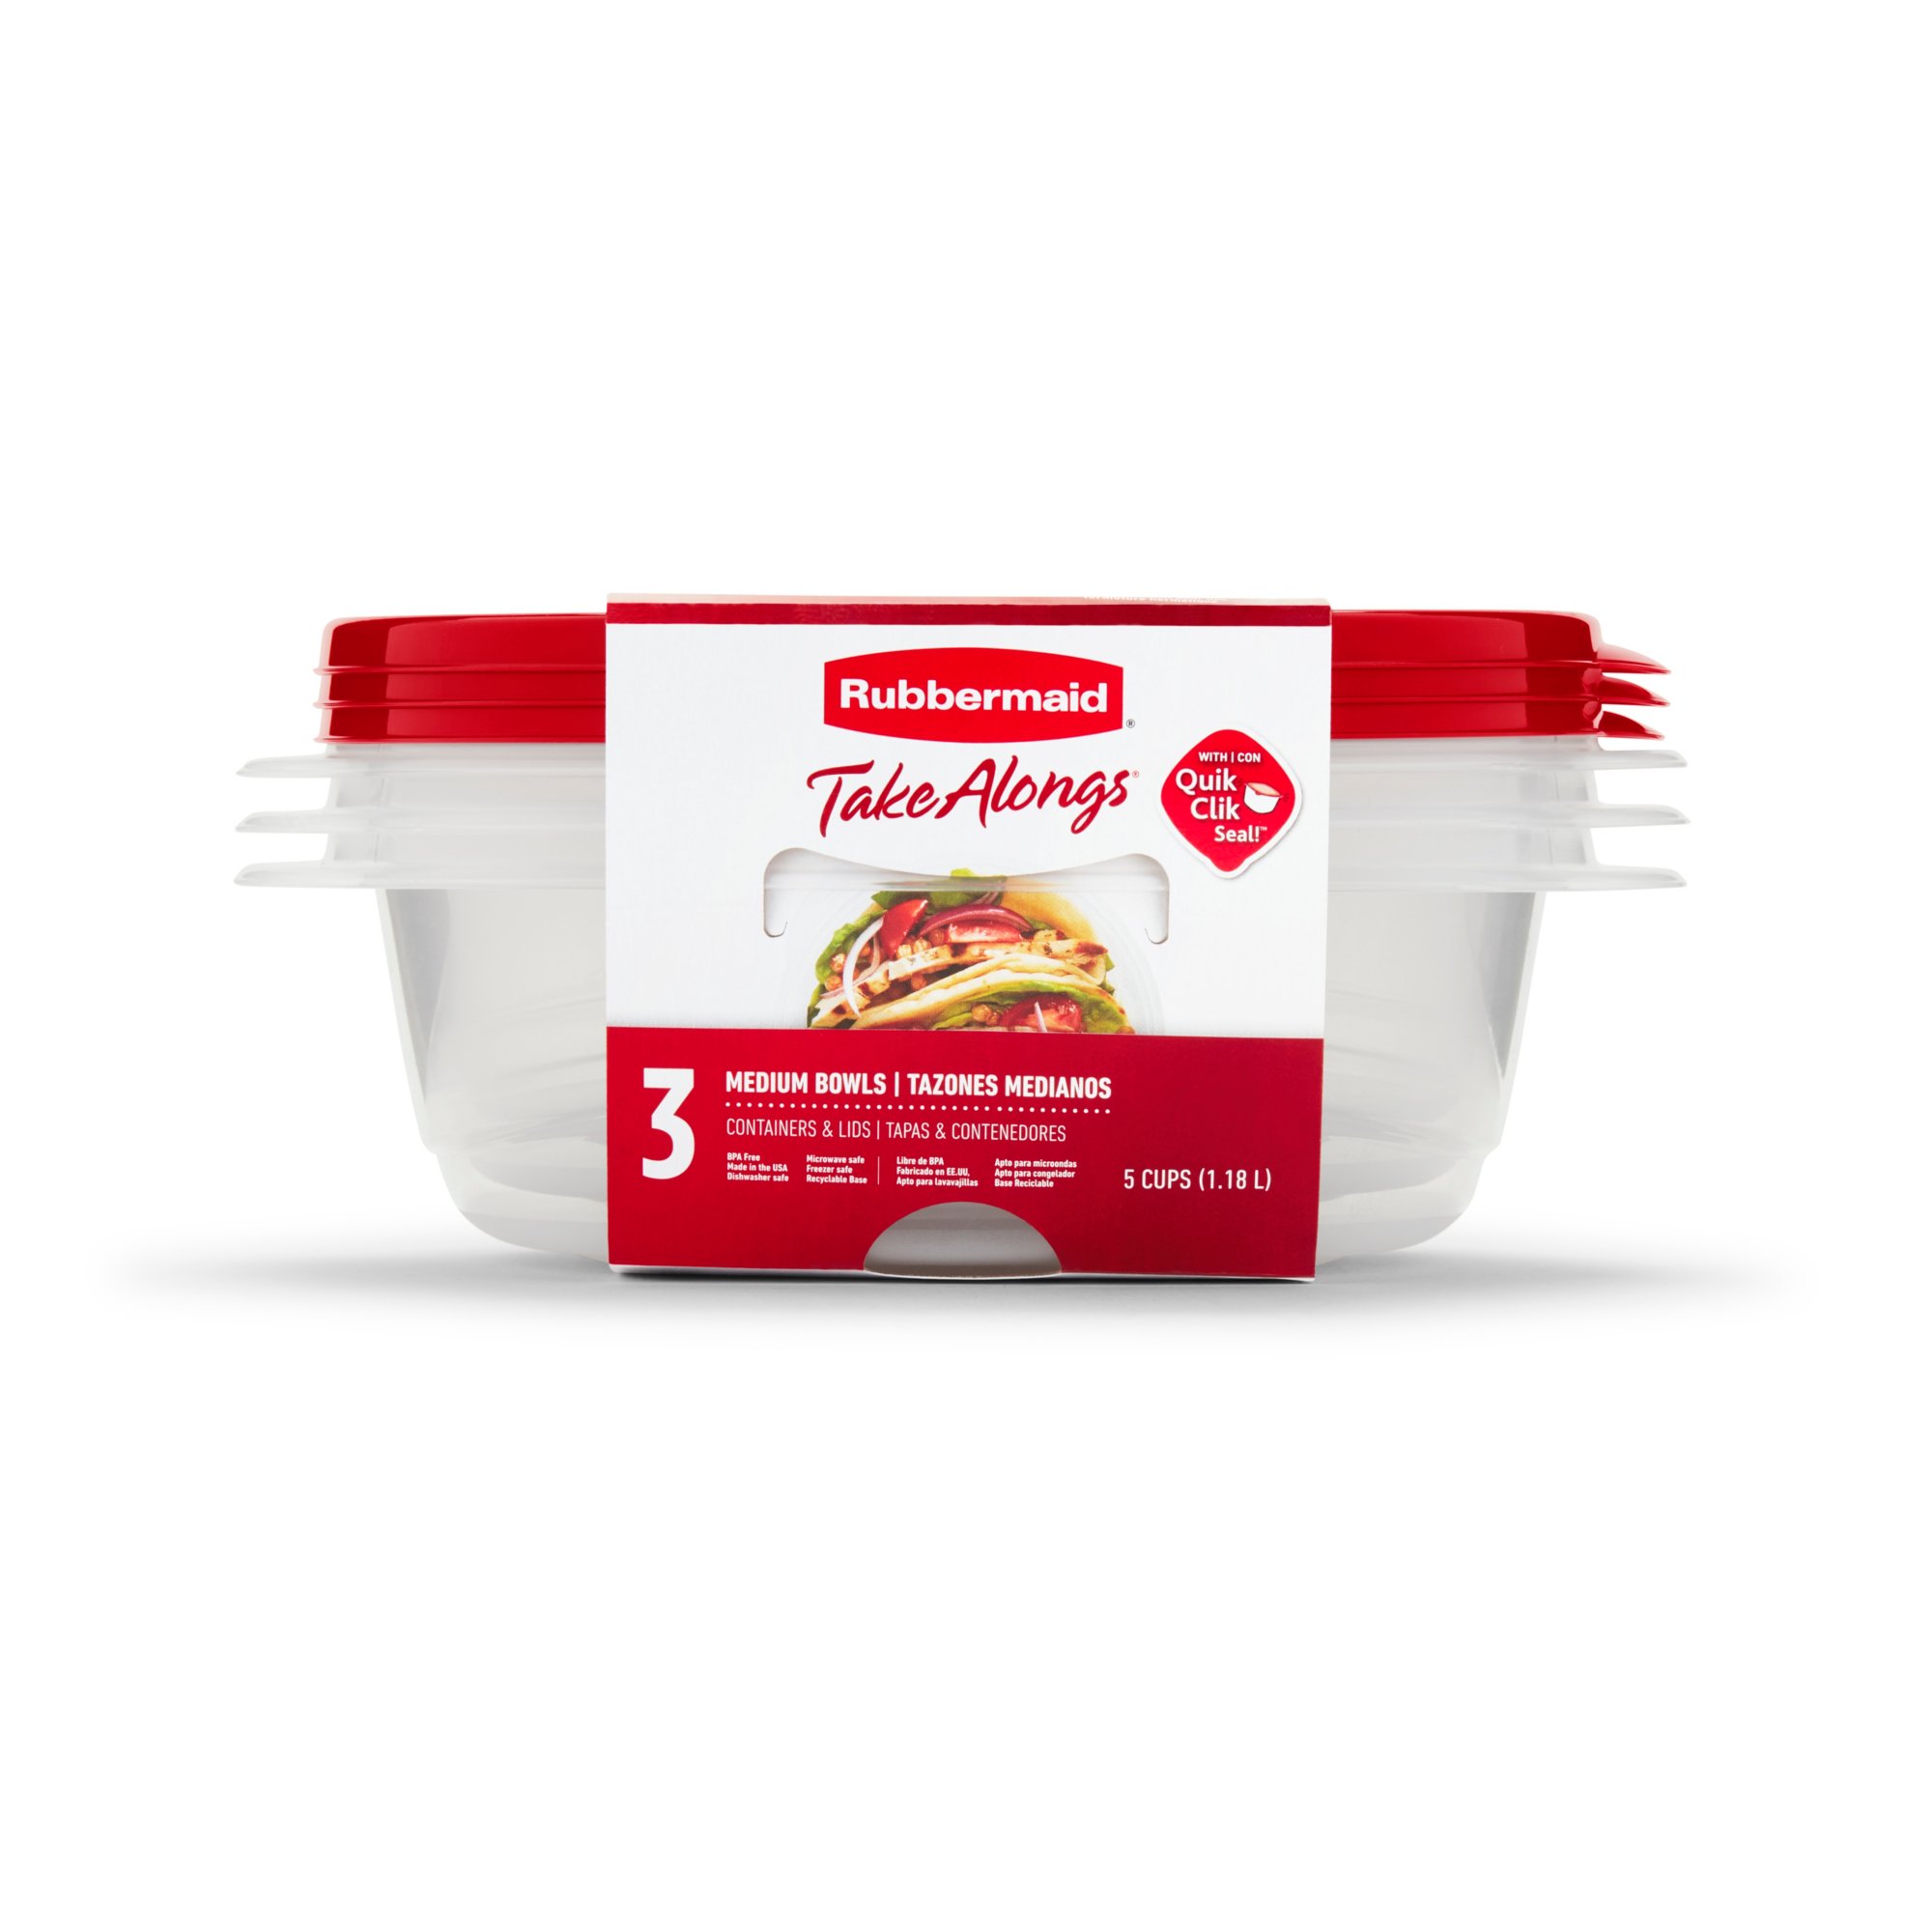 https://s7d9.scene7.com/is/image/NewellRubbermaid/2086733-rubbermaid-food-storage-takealongs-OS-5.0C-1.2L-TKA-RND-3PK-RUBY-front-of-pack-straight-on?wid=2000&hei=2000